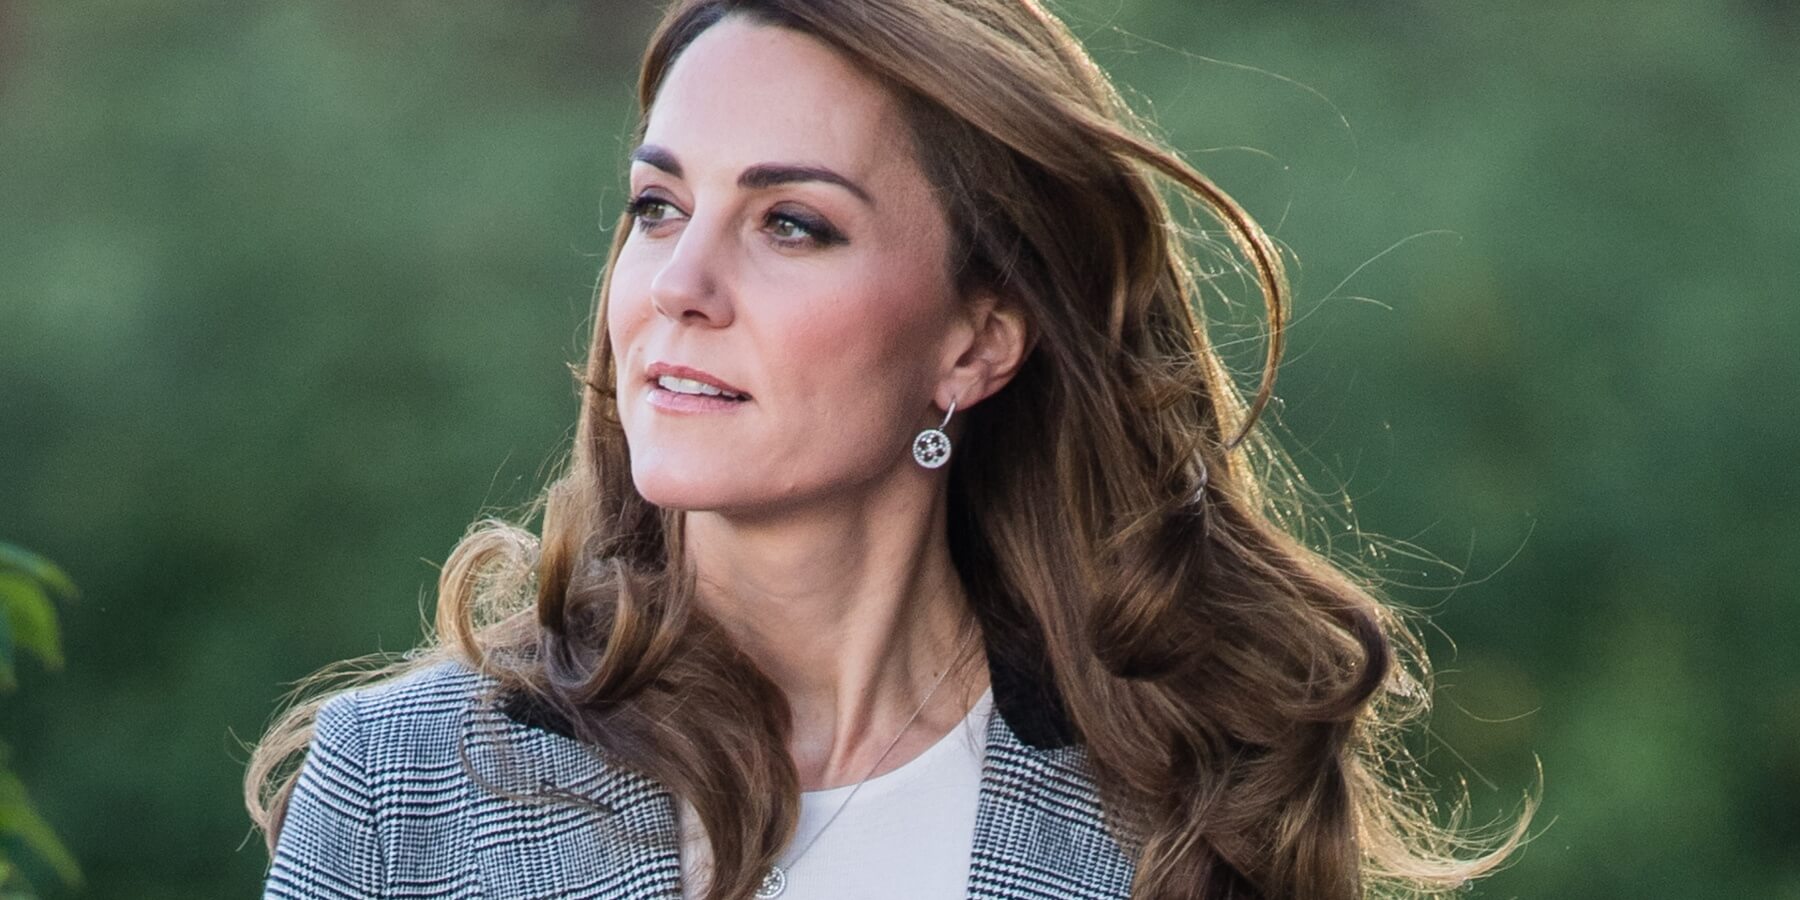 Kate Middleton’s Royal Return Delayed: ‘Unsettling’ News, Palace ‘Unwilling’ to Confirm Details, Author